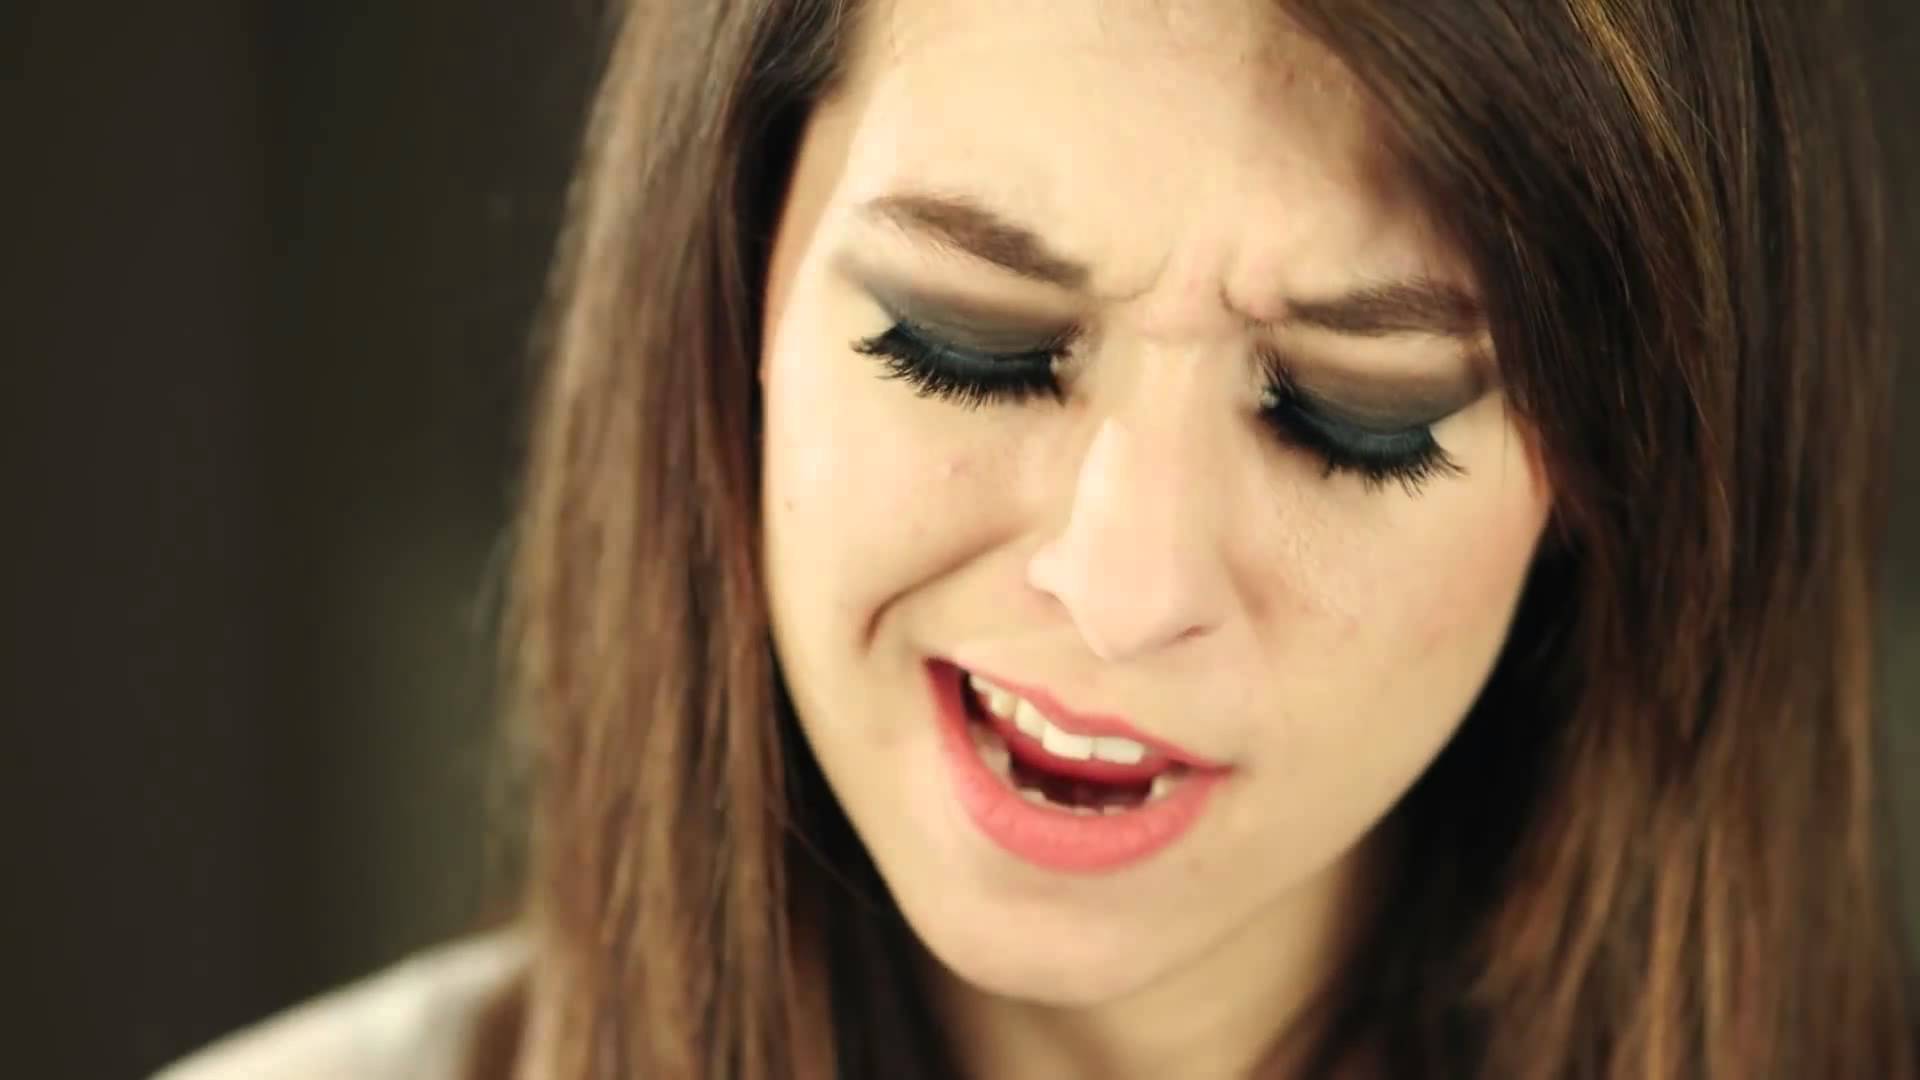 Christina Grimmie Demons by Imagine Dragons - YouTube